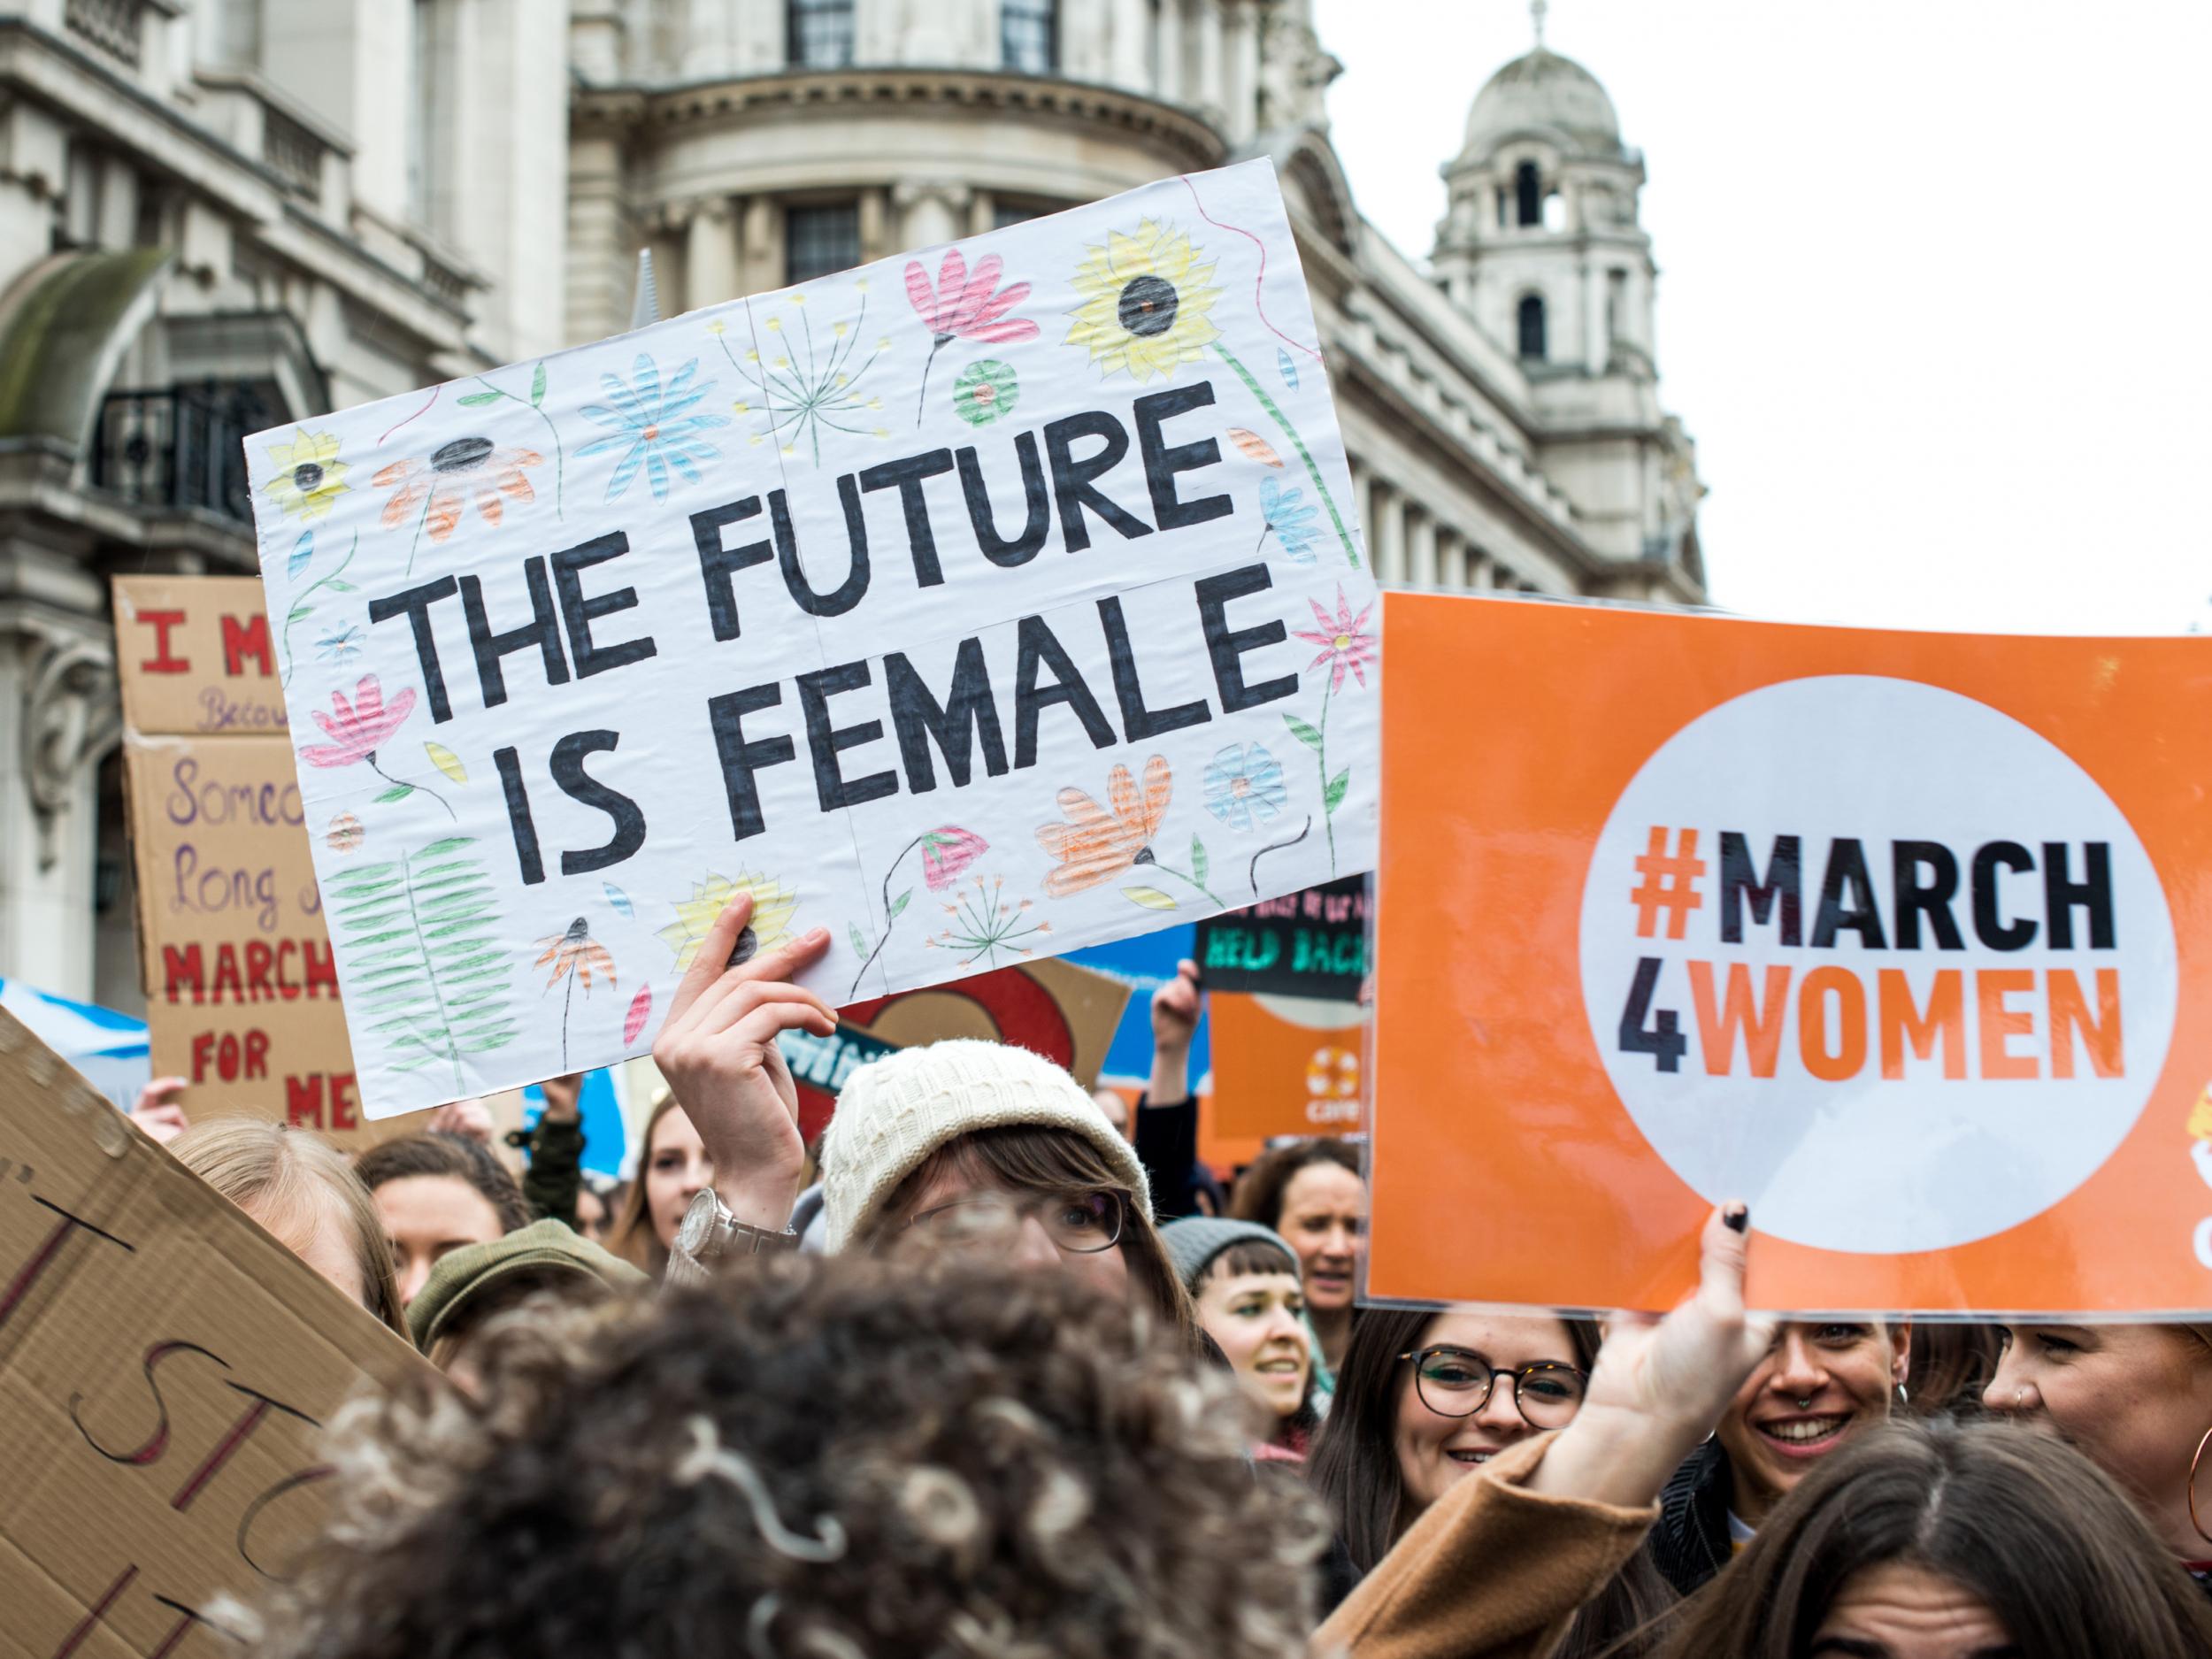 Placards are displayed during the March4Women on 4 March in London